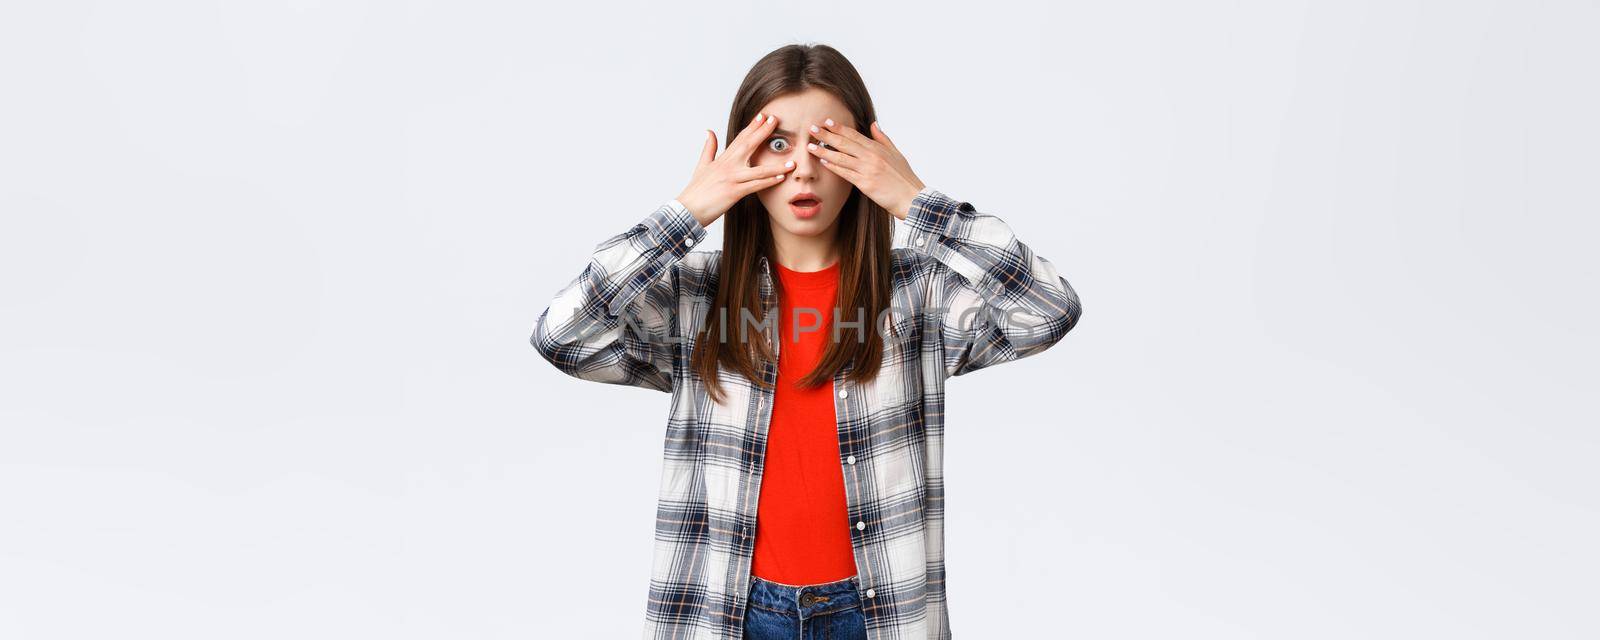 Lifestyle, different emotions, leisure activities concept. Shocked and speechless young pretty female in checked shirt, cover eyes from cringy thing but peeking through fingers.